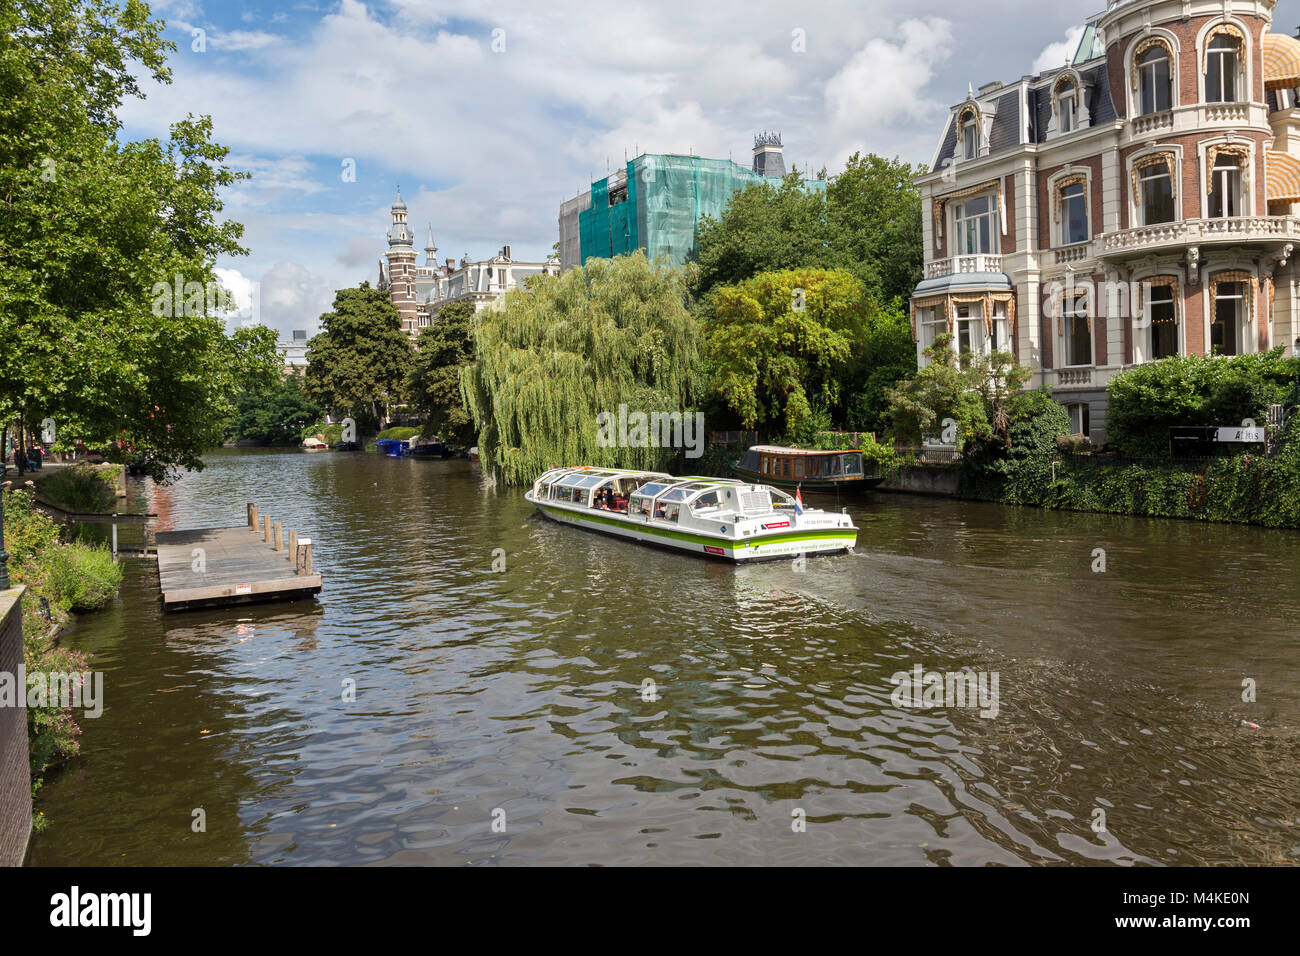 View of a tree lined canal with, hop on hop off tour boat full of tourists. This spot is located across from the popular Rijksmuseum. Stock Photo